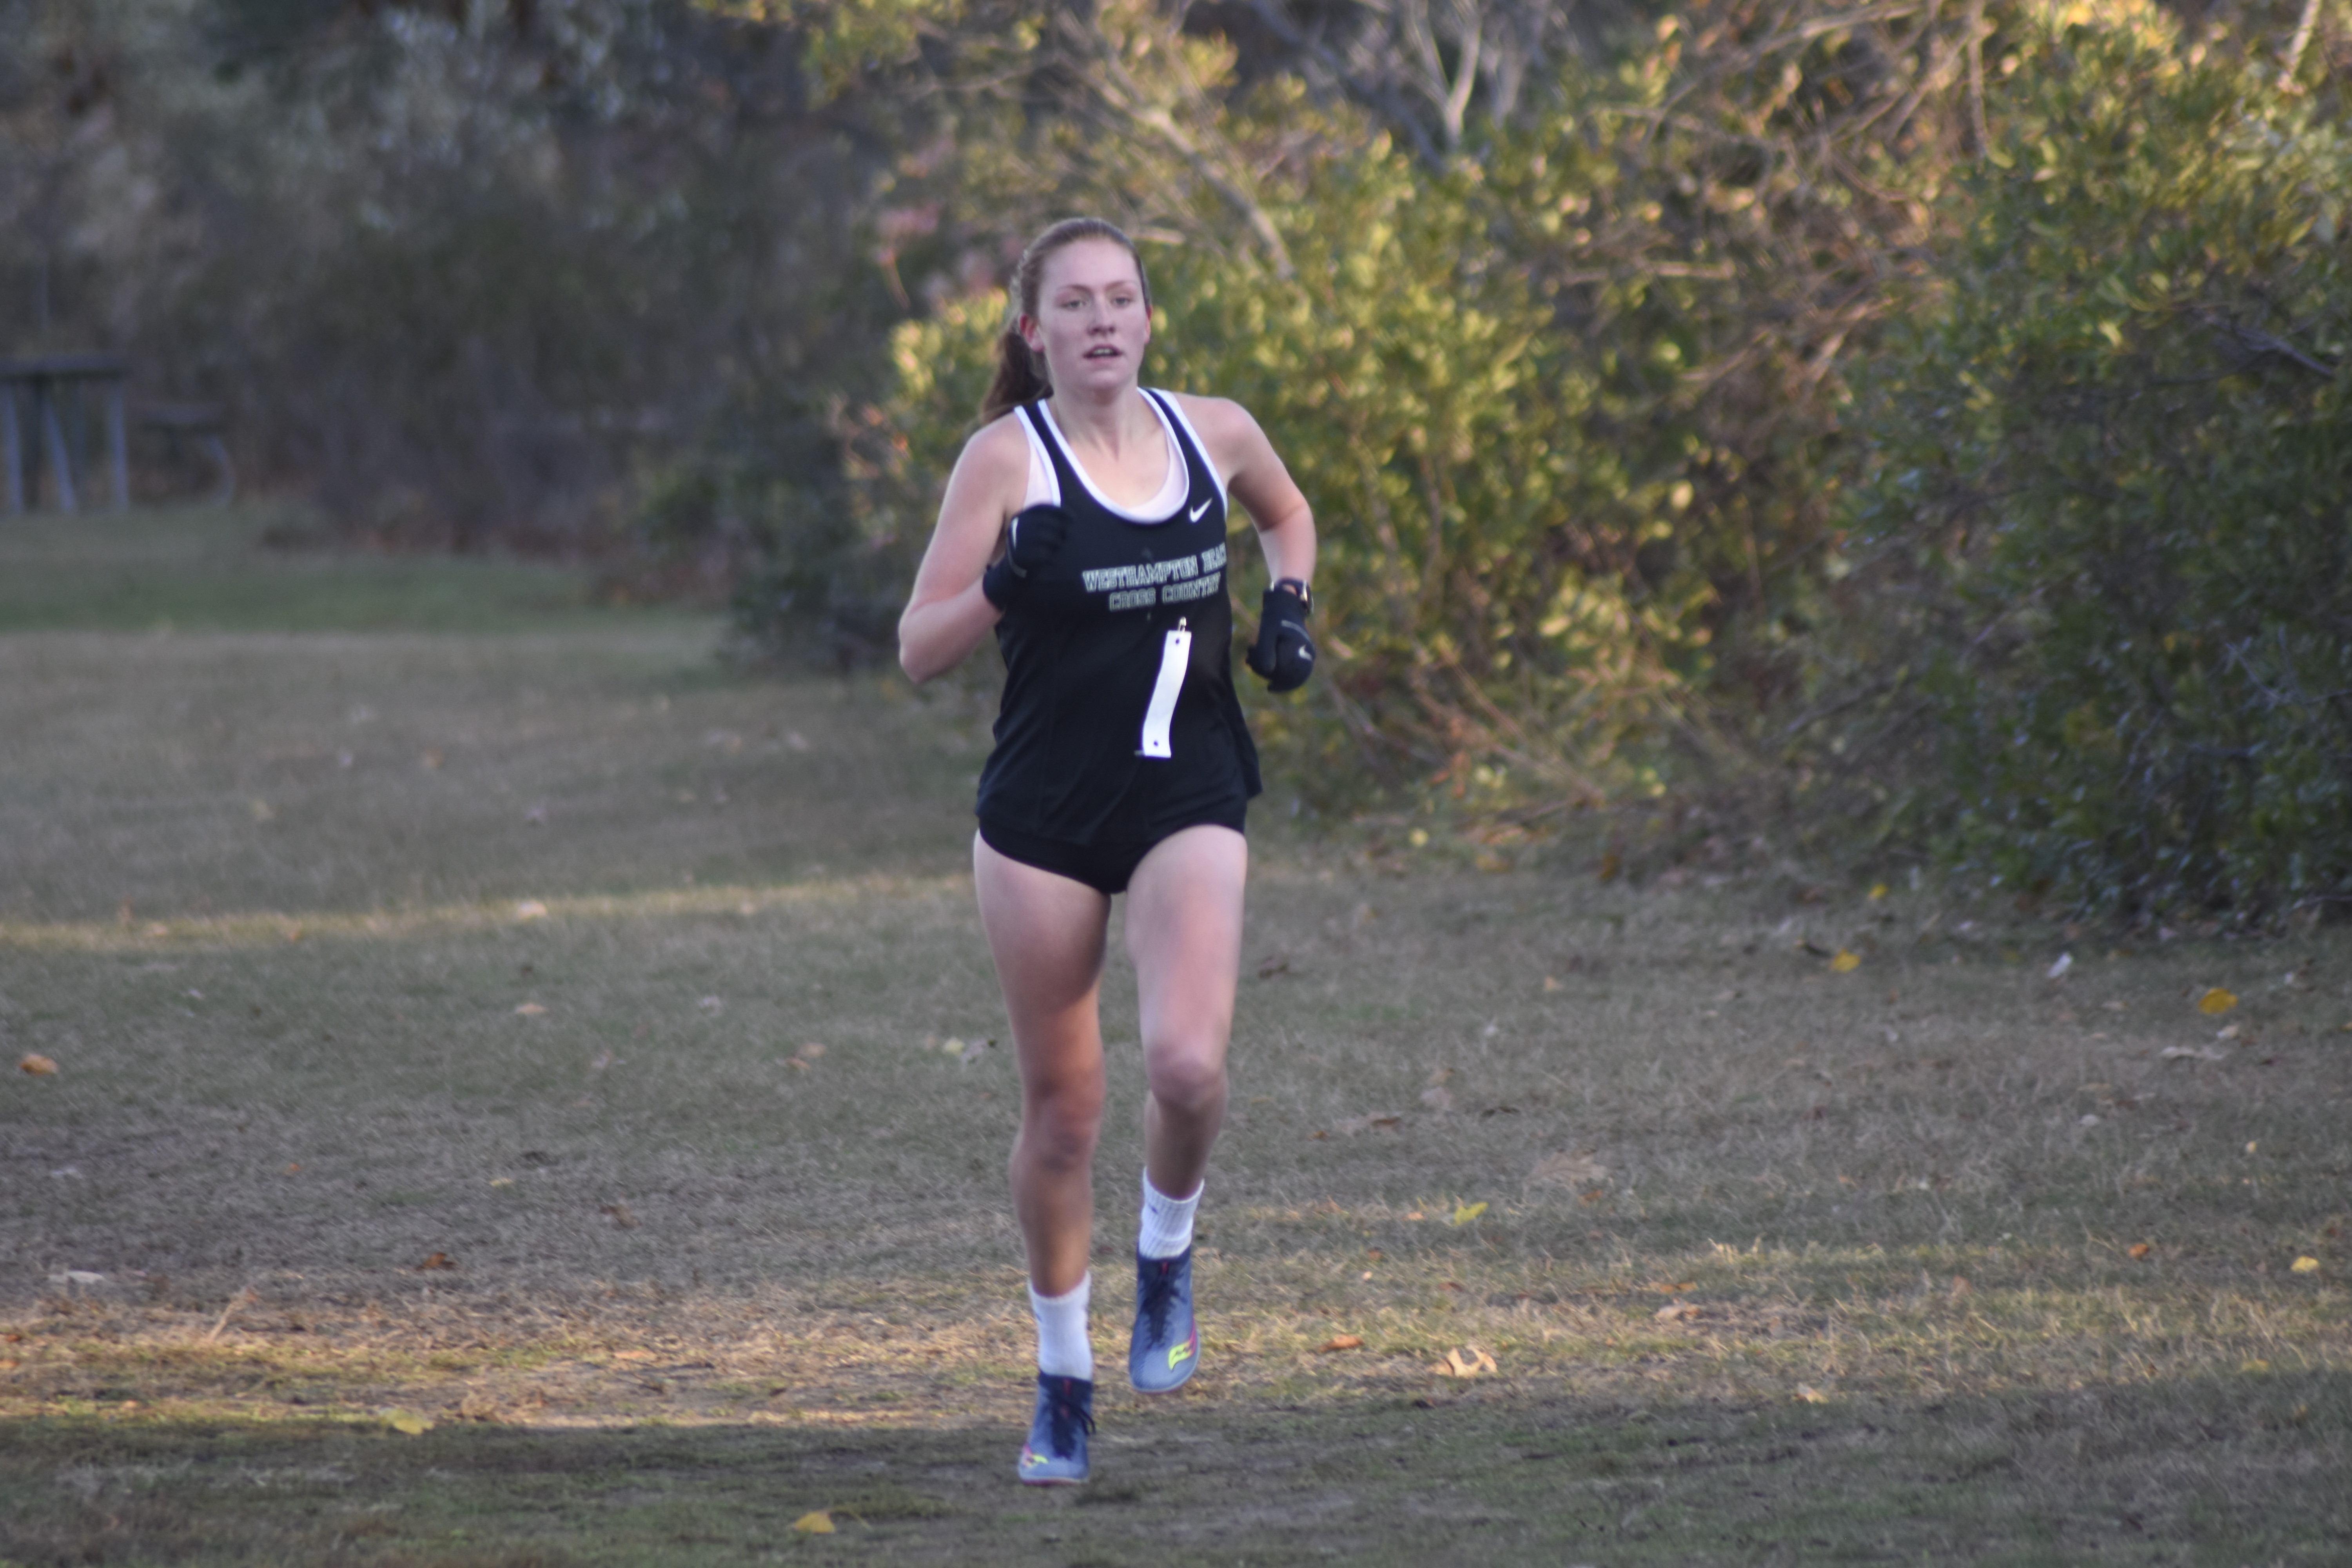 Westhampton Beach junior Jackie Amato placed second in Class B and qualified for states for the second year in a row.